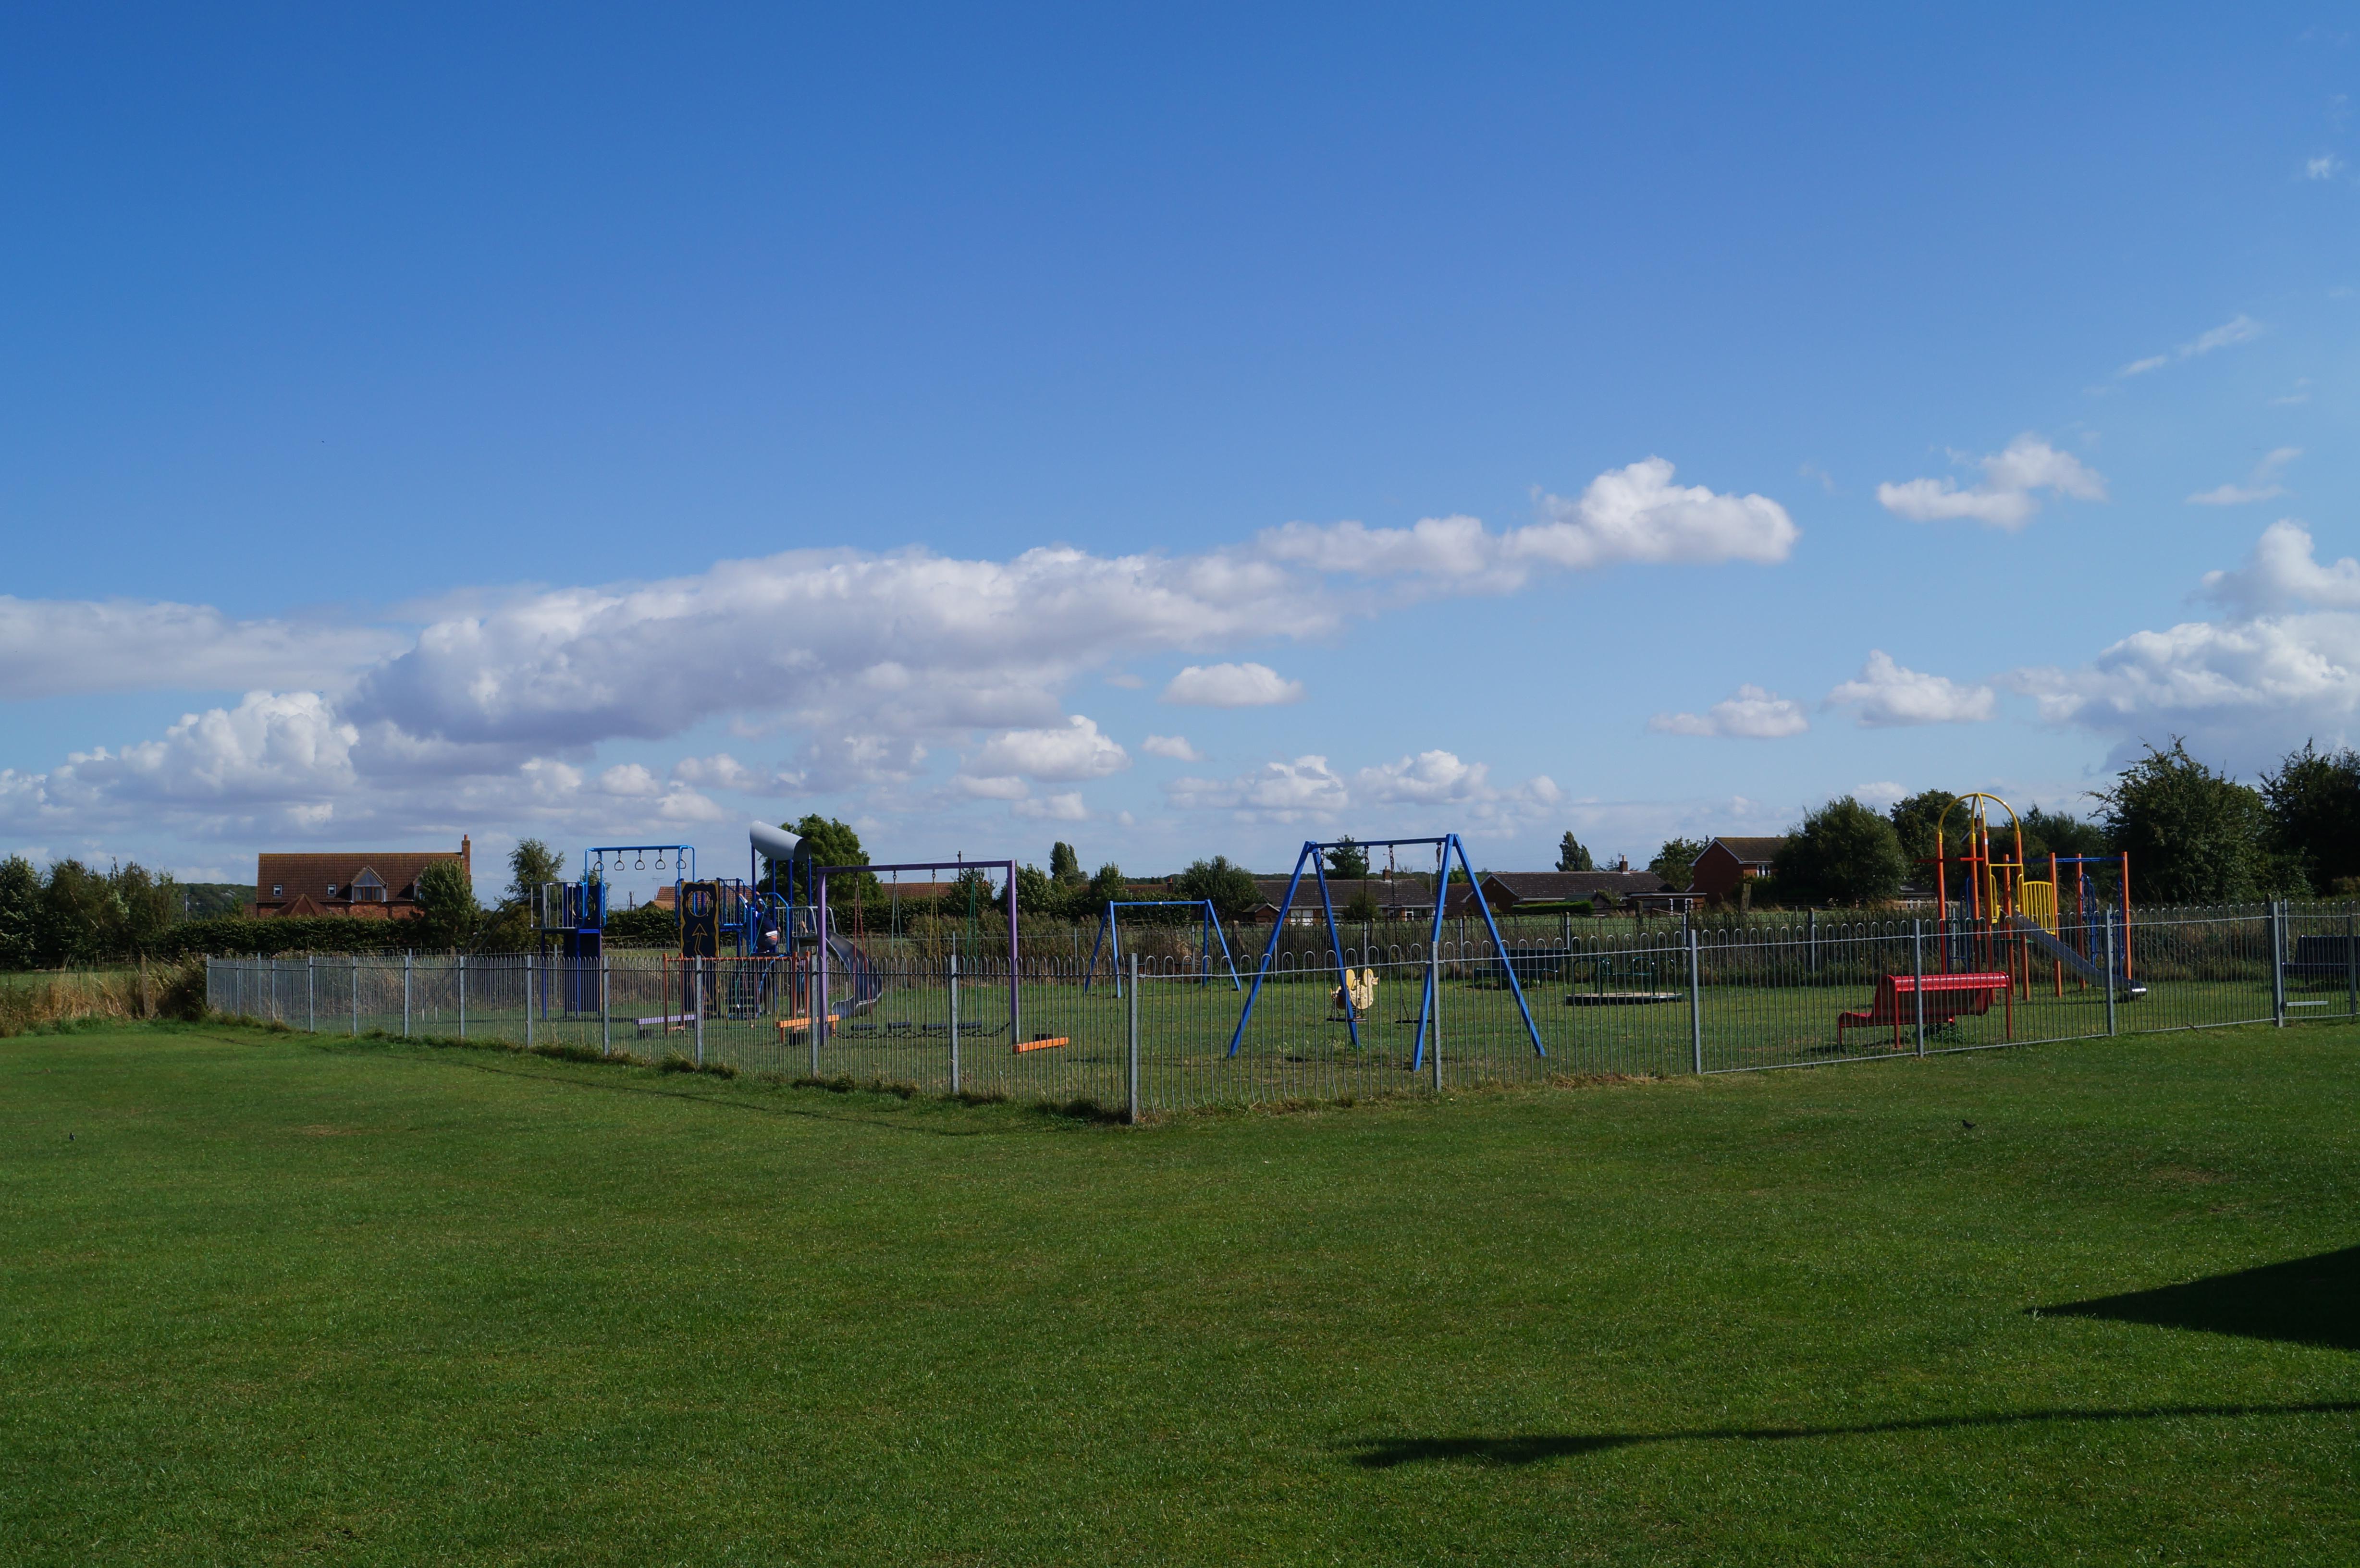 Play area at the sports ground